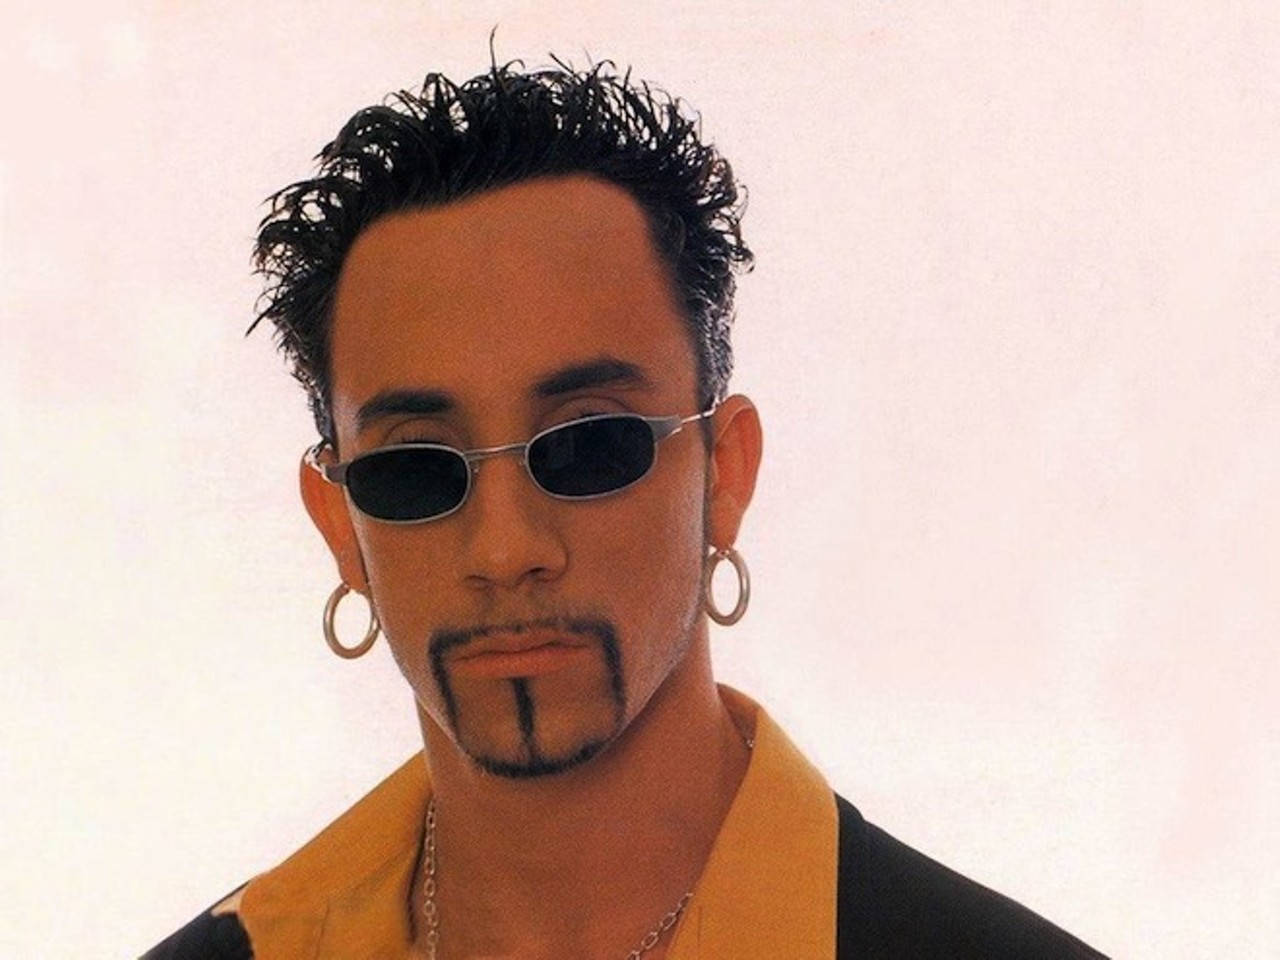 A.J. McLean moved to Orlando in 1990 to pursue an acting career with Disney and Nickelodeon television studios. In 1993, he and  Nick Carter, Howie Dorough, Kevin Richardson, and Brian Littrell formed the Backstreet Boys. McLean has since left Orlando for Los Angeles. via